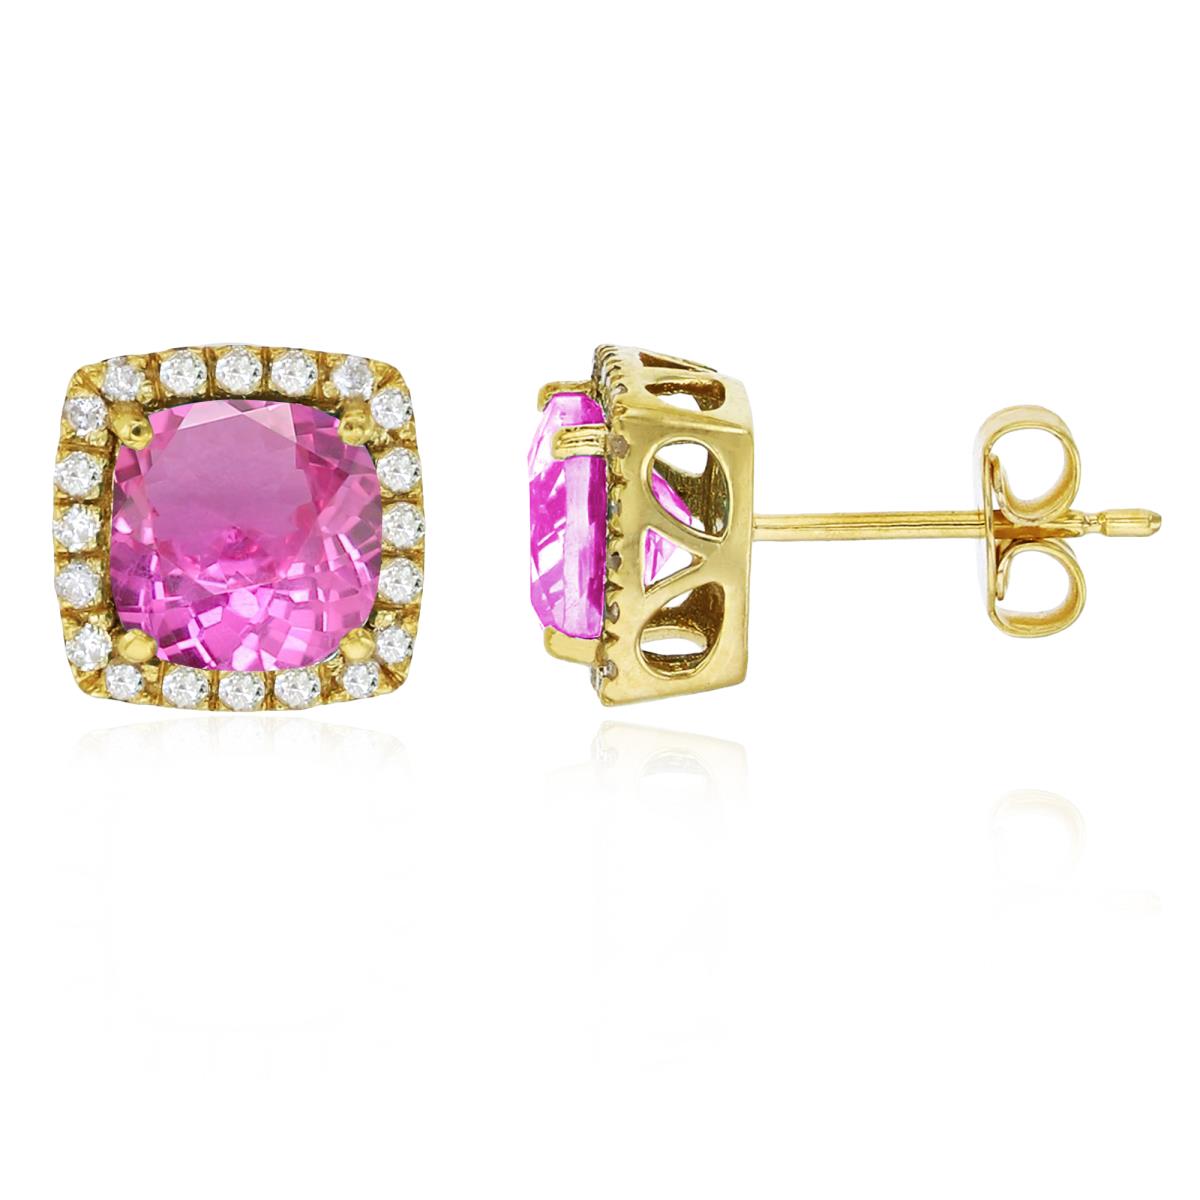 Sterling Silver Yellow 6mm Cushion Cr Pink Sapphire & Cr White Sapphire Halo Stud Earring